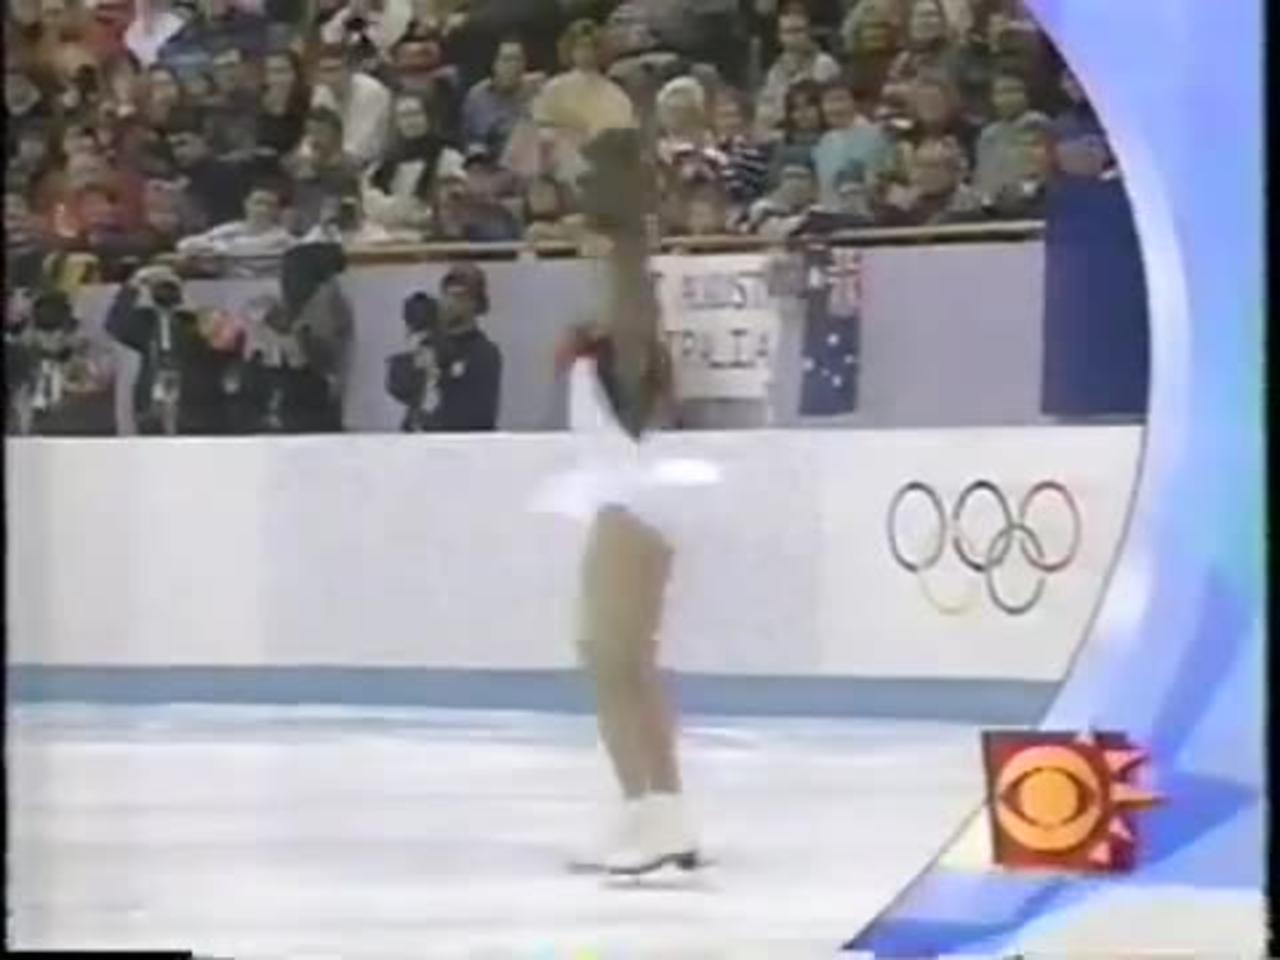 February 26, 1994 - 'CBS This Morning' Promo from Winter Olympics